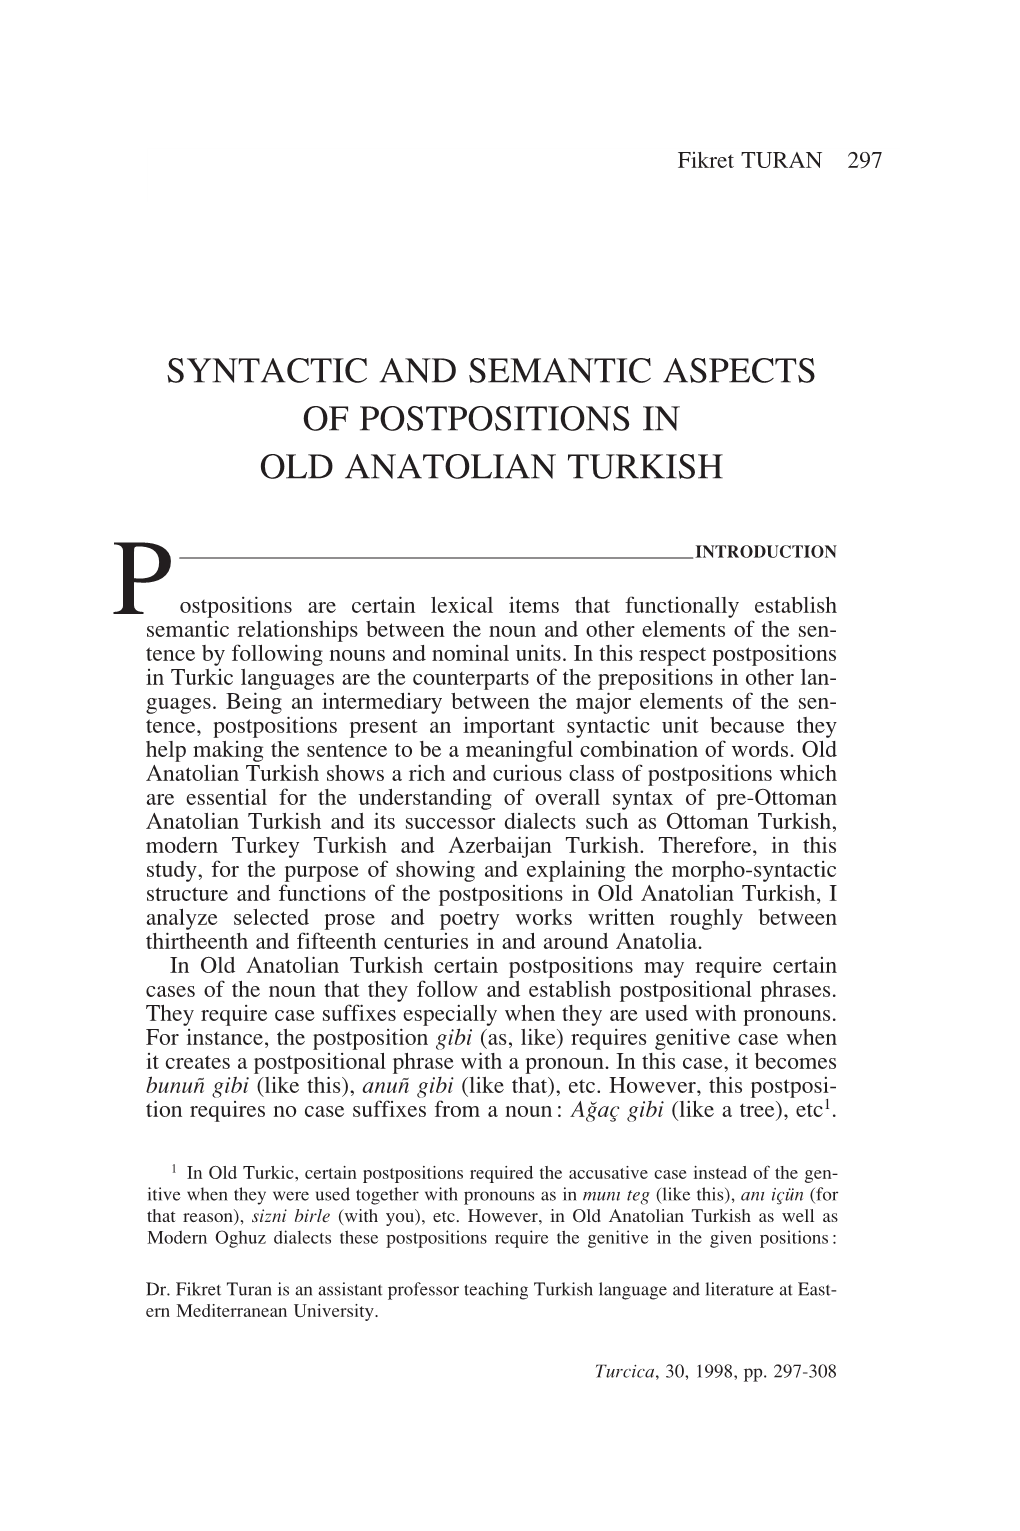 Syntactic and Semantic Aspects of Postpositions in Old Anatolian Turkish